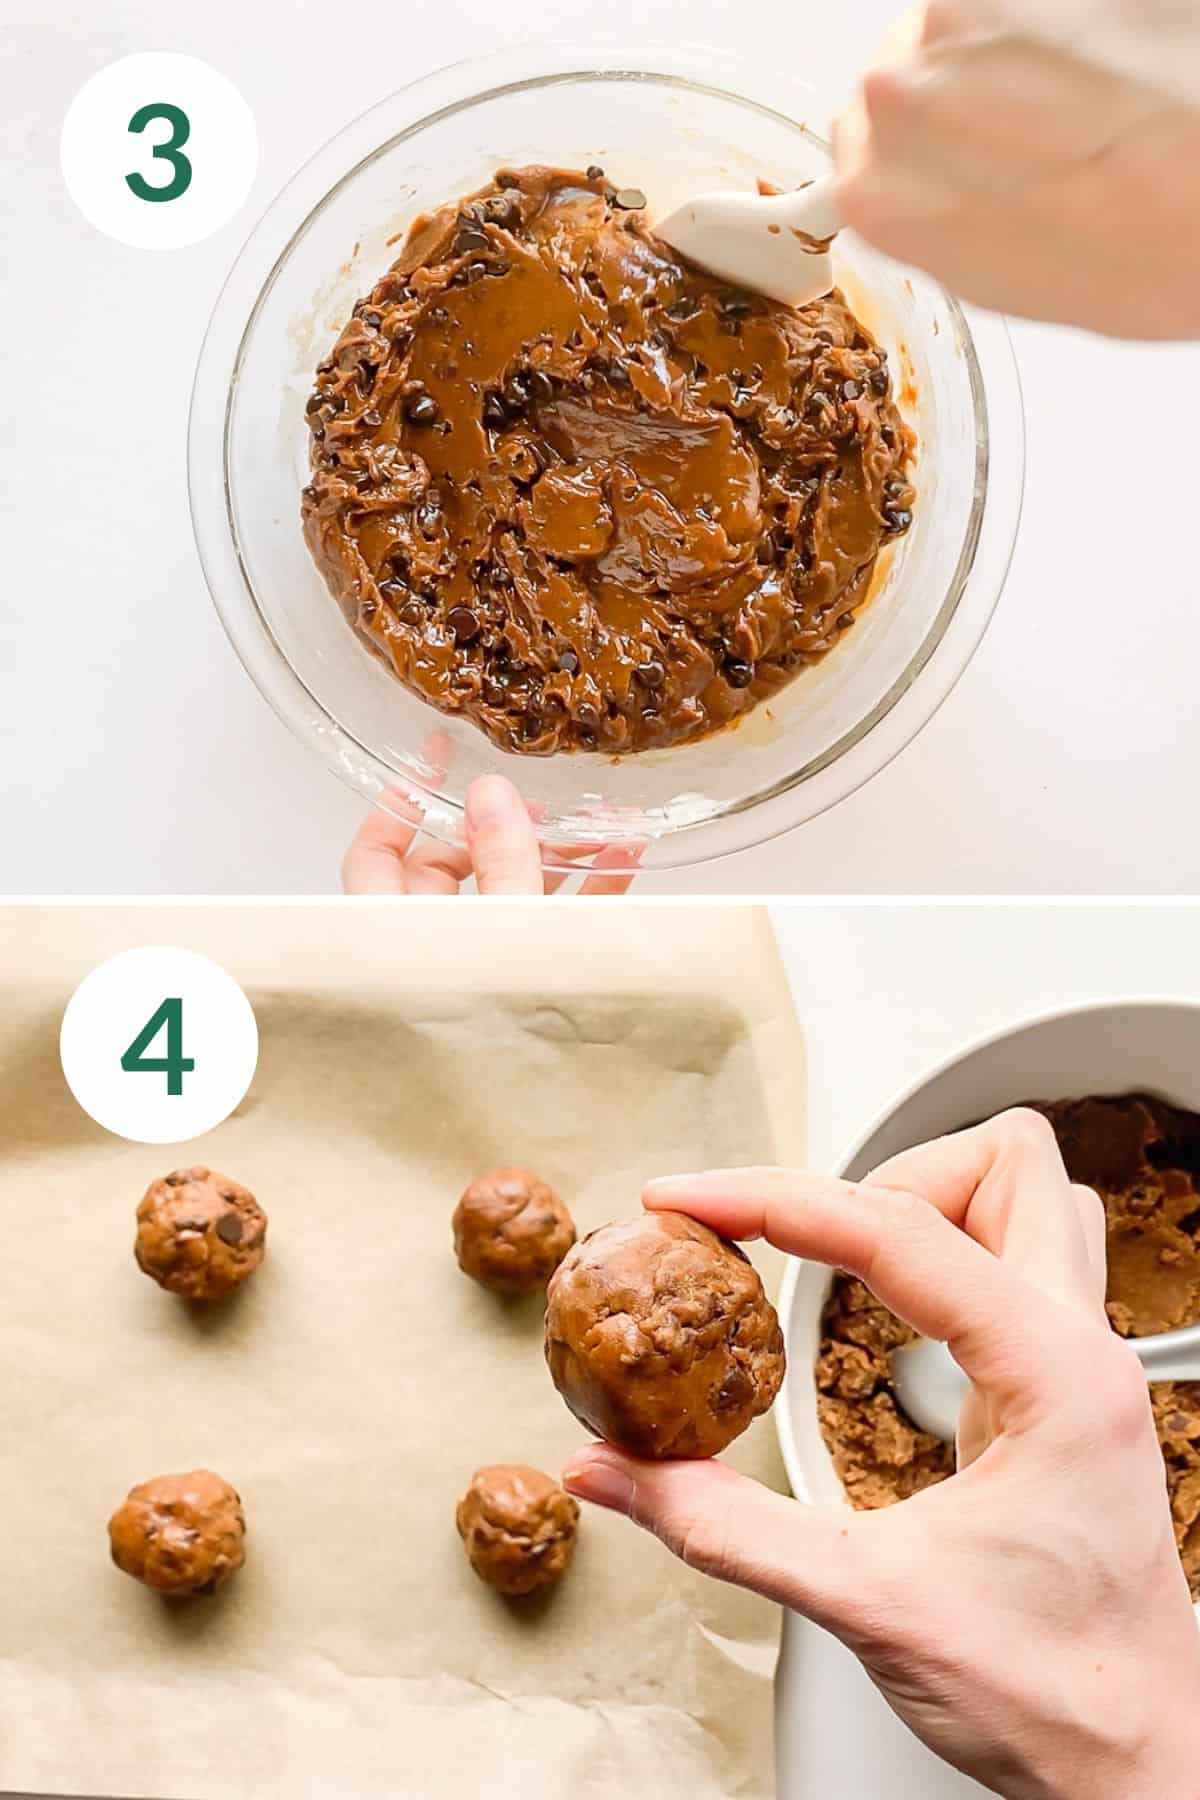 The finished coconut sugar chocolate chip cookie dough in a bowl and then rolled into 1 ½ inch balls.